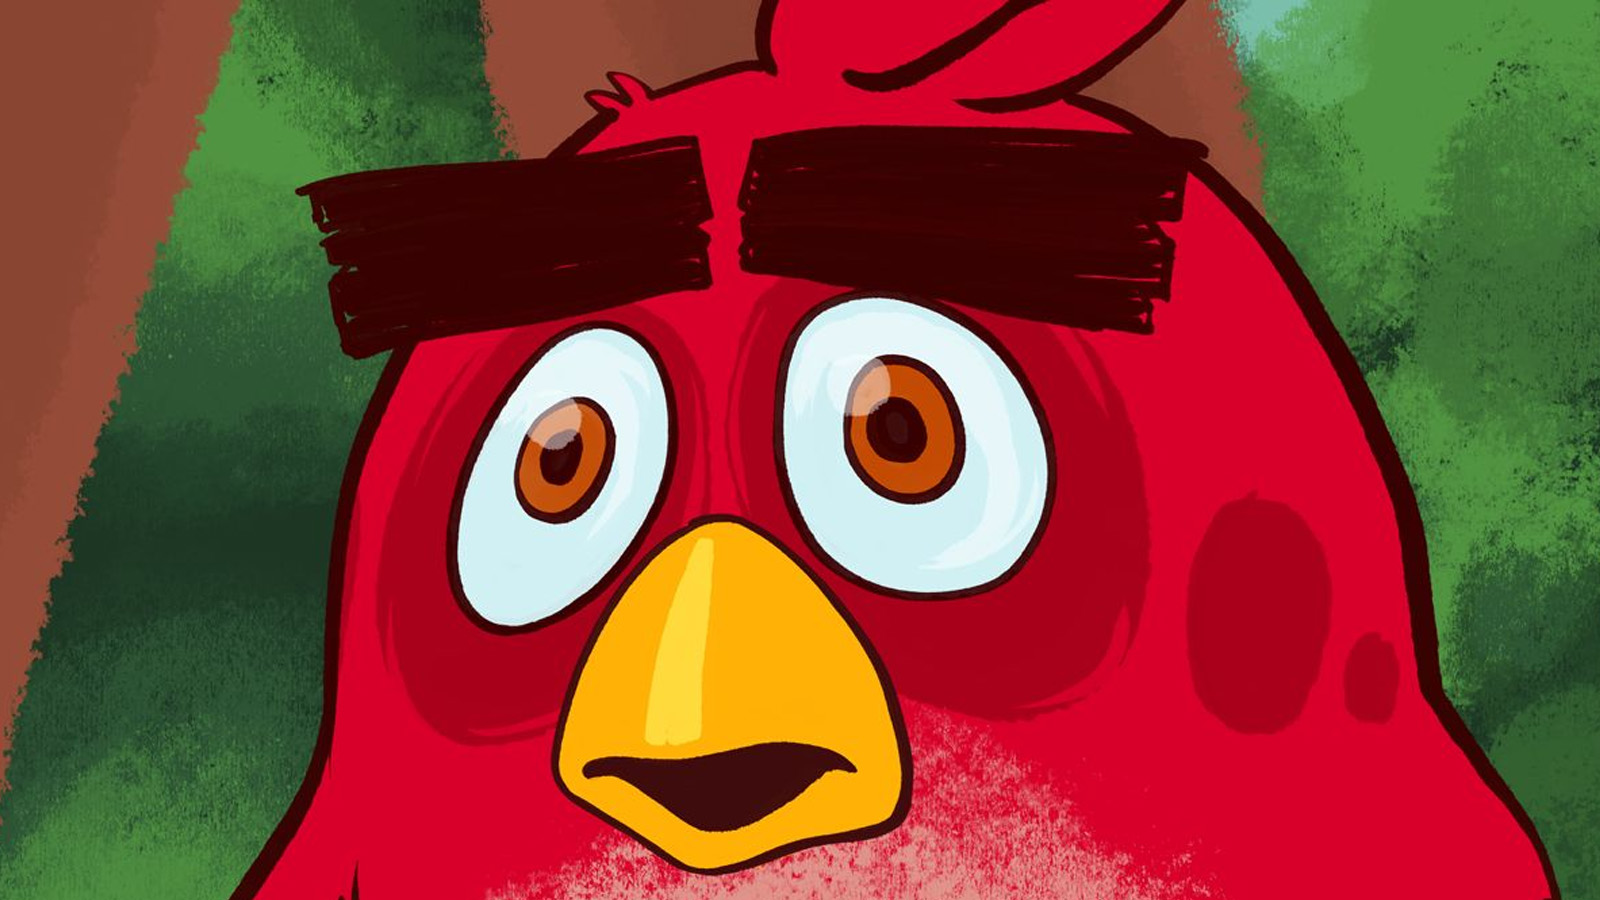 Rovio delists original Angry Birds due to impact on free-to-play games